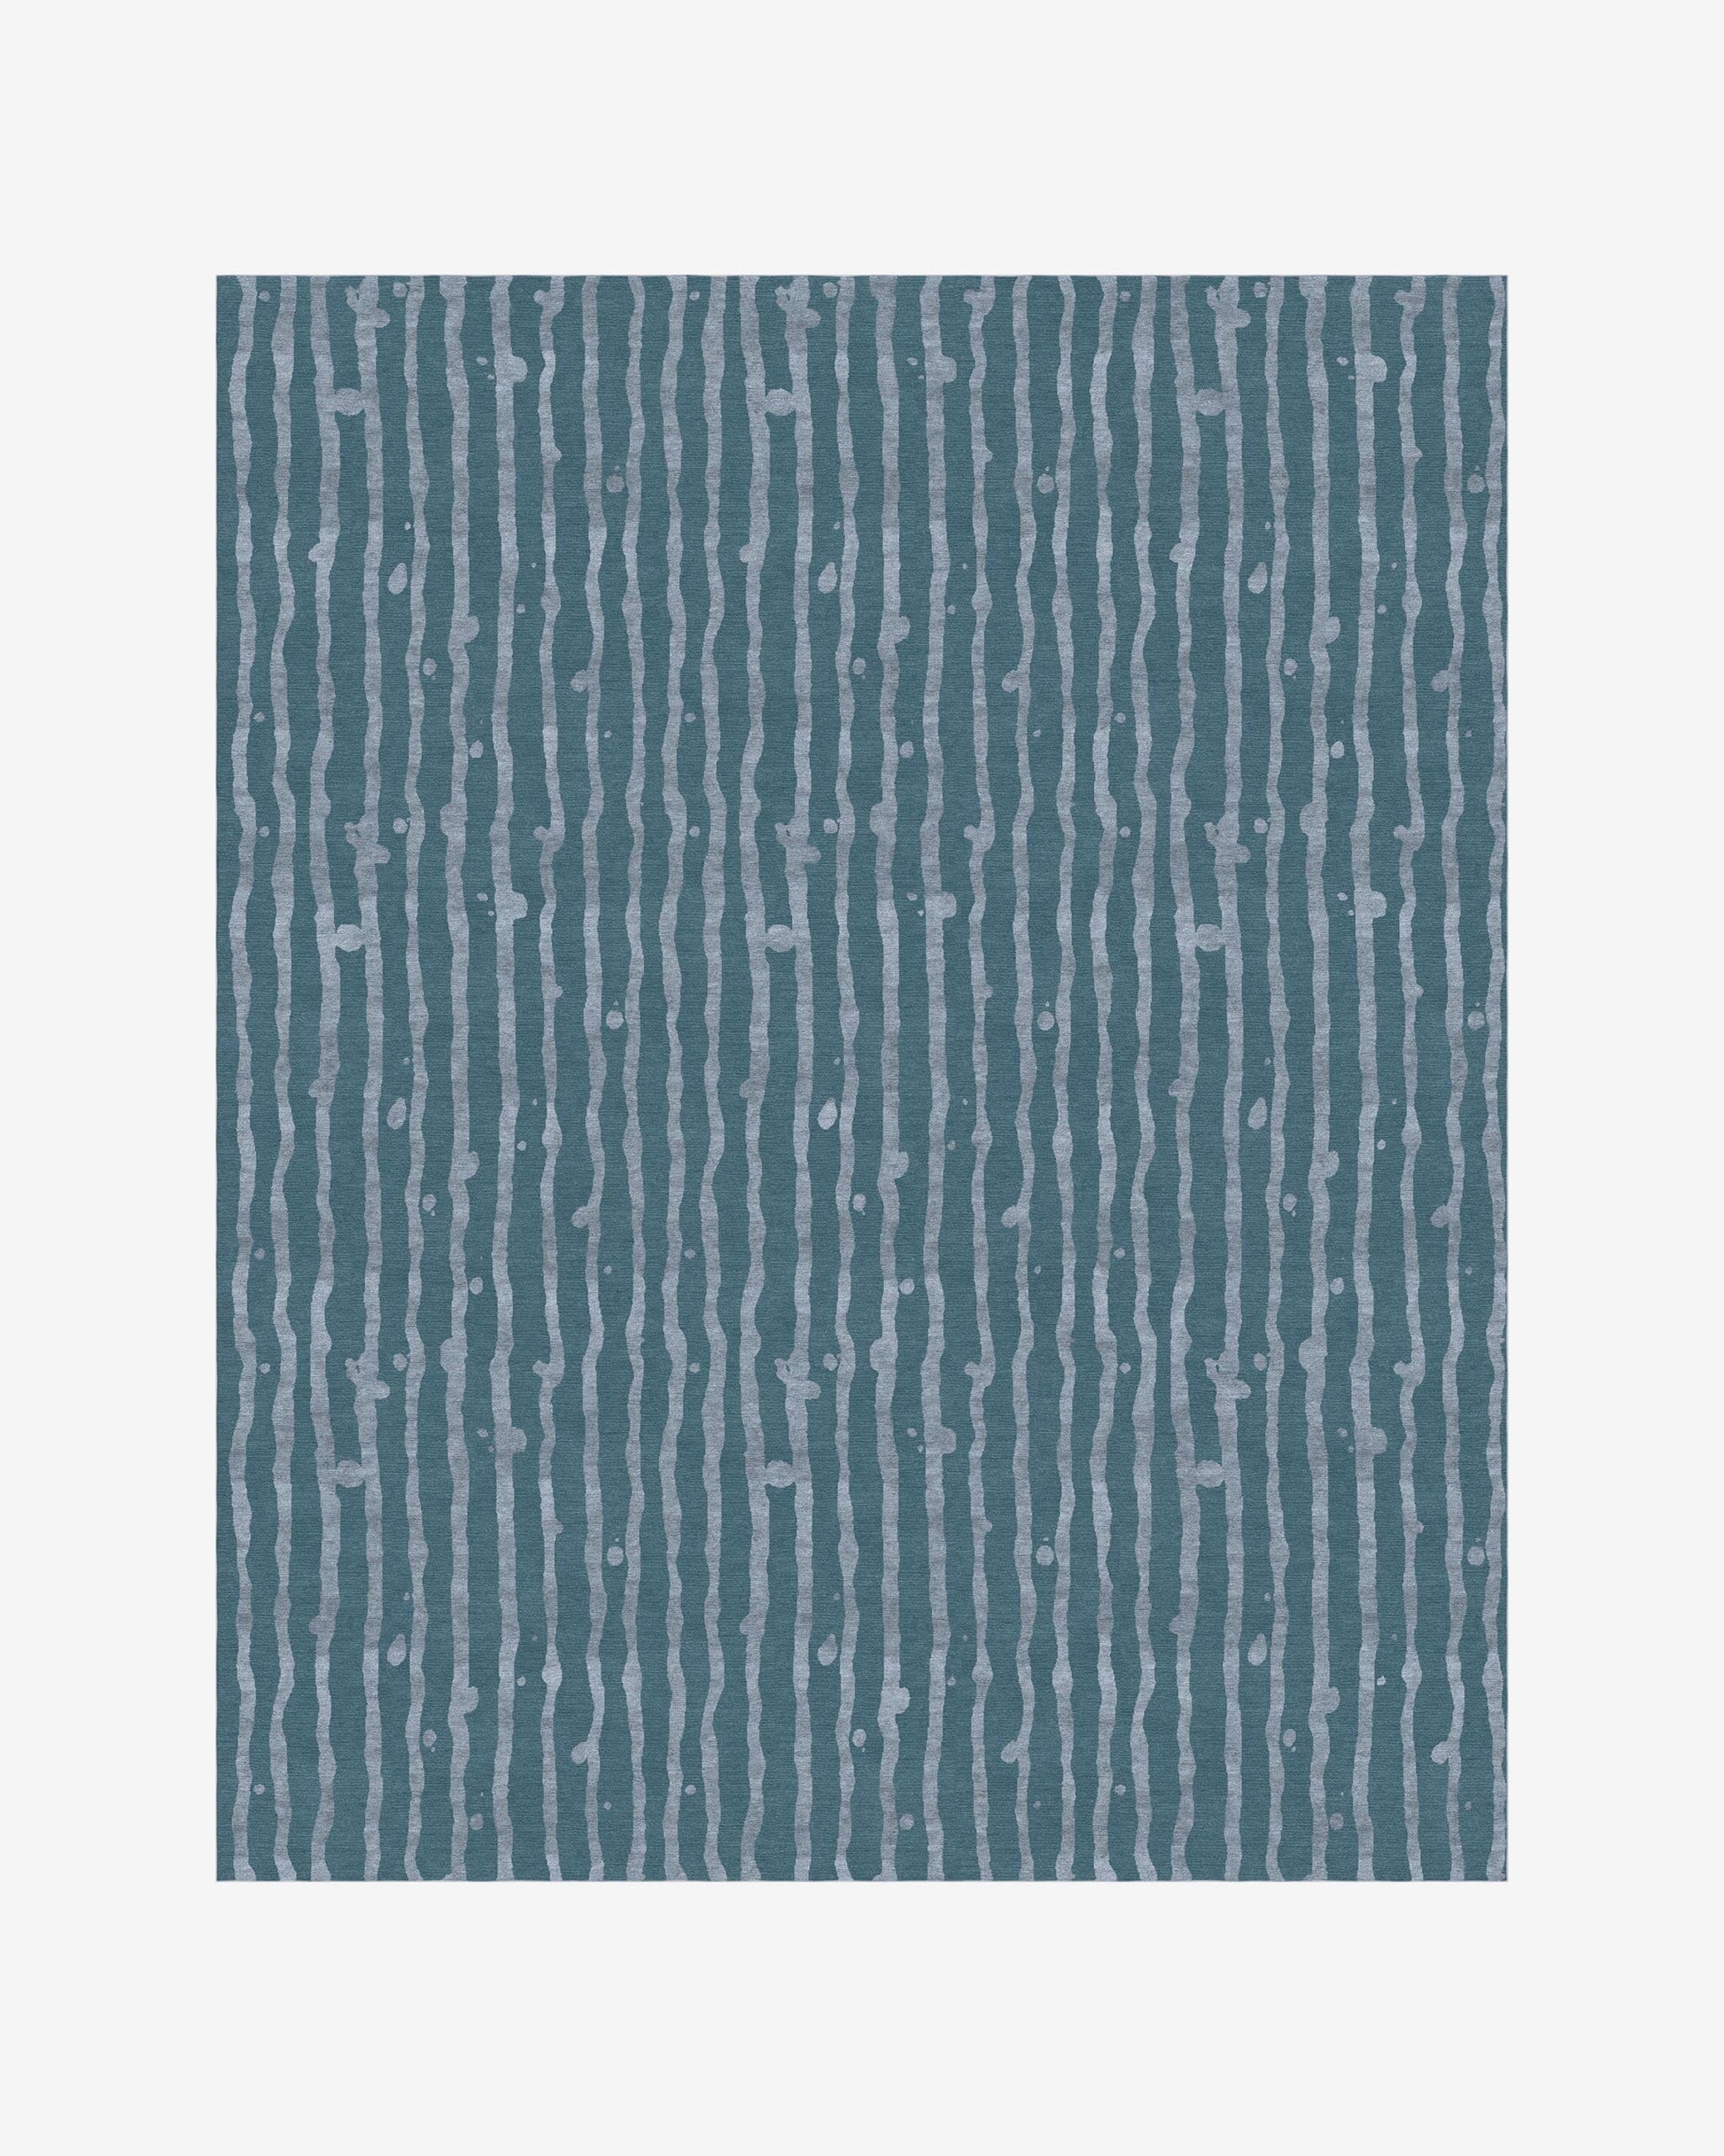 An image of the Drippy Stripe Hand Knotted Rug Gulf with an aquatic feeling